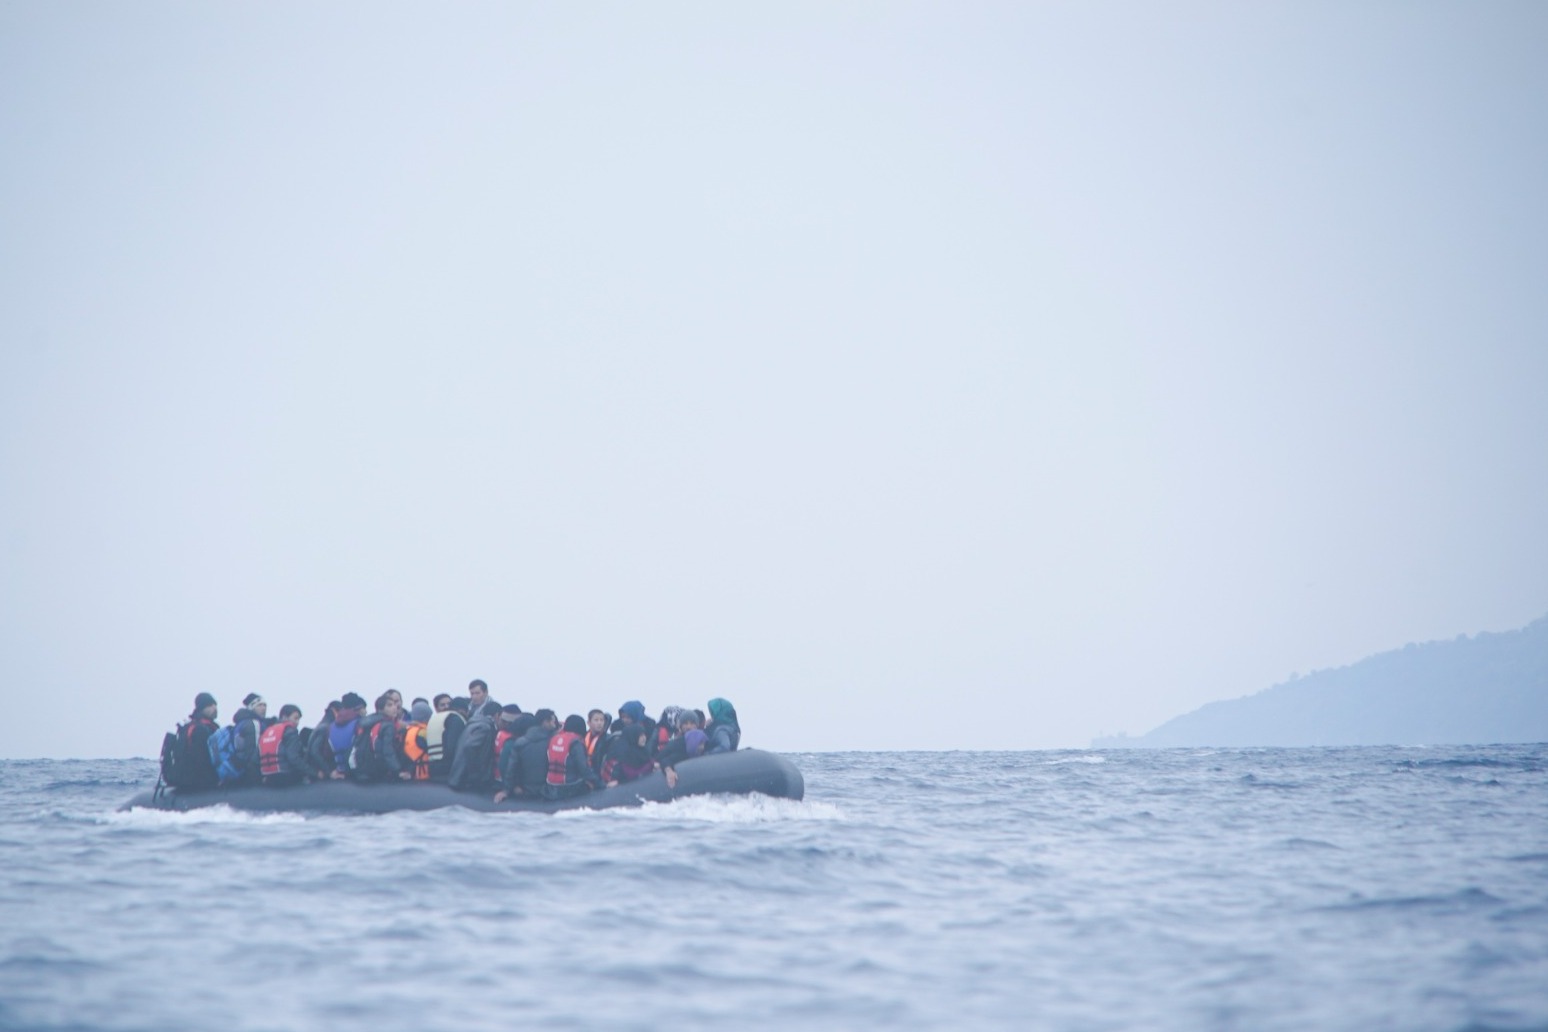 UK says rising migrant Channel crossings are a major incident 